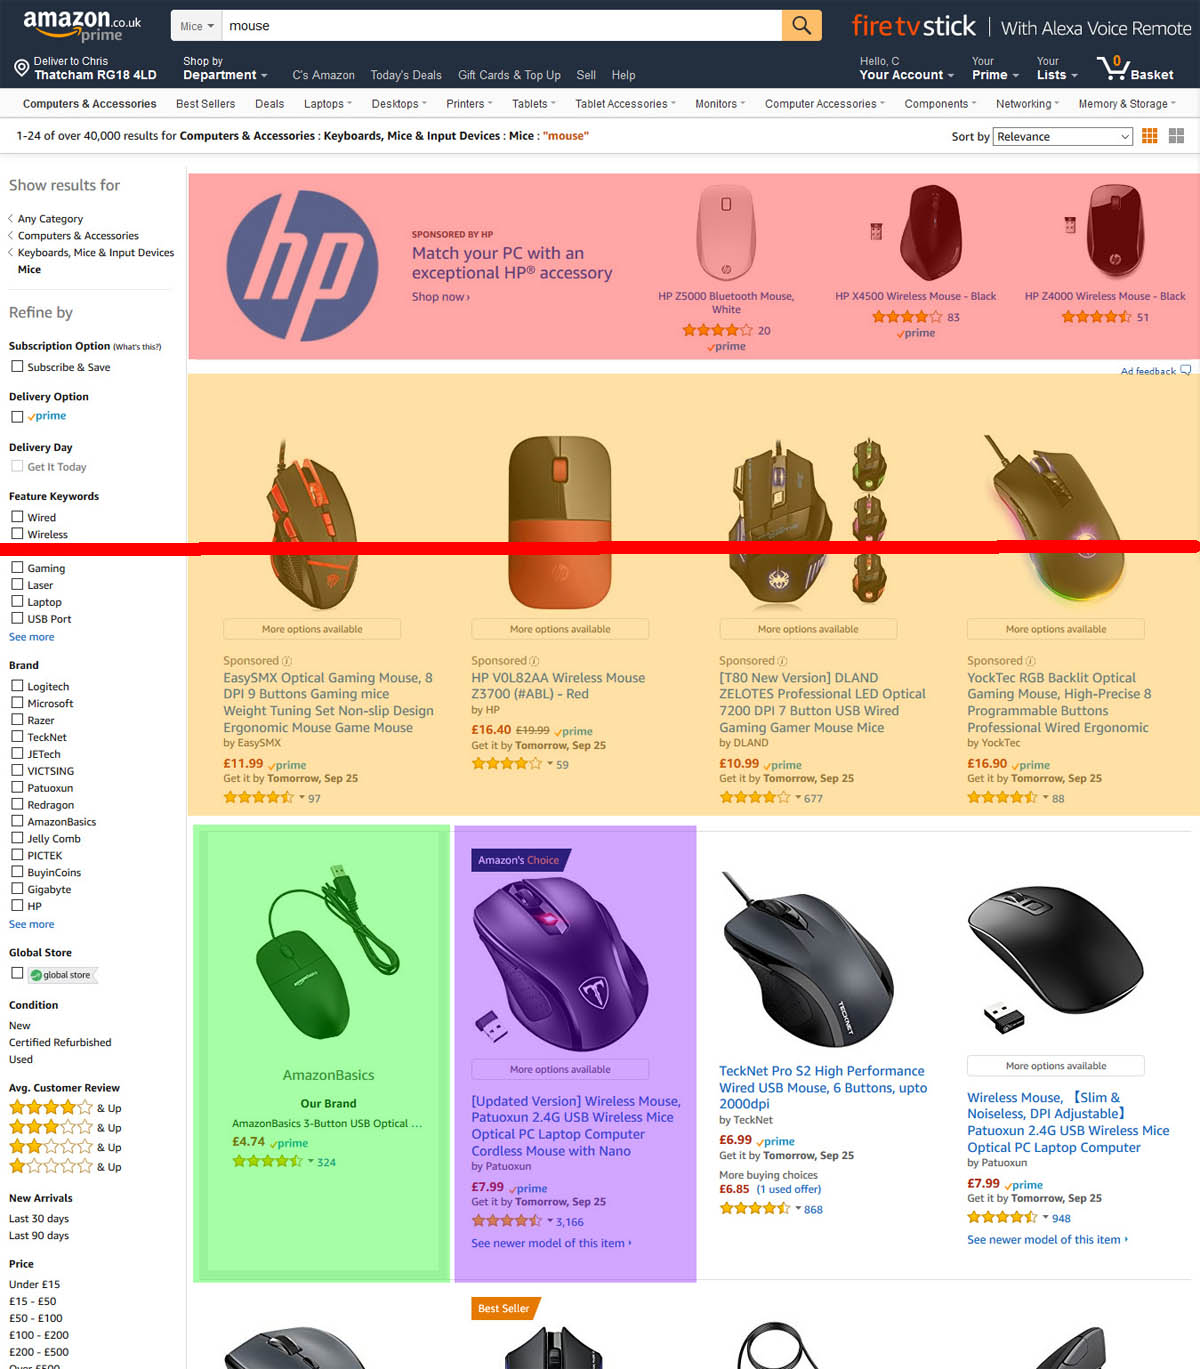 Amazon Advertising on search results page for mouse